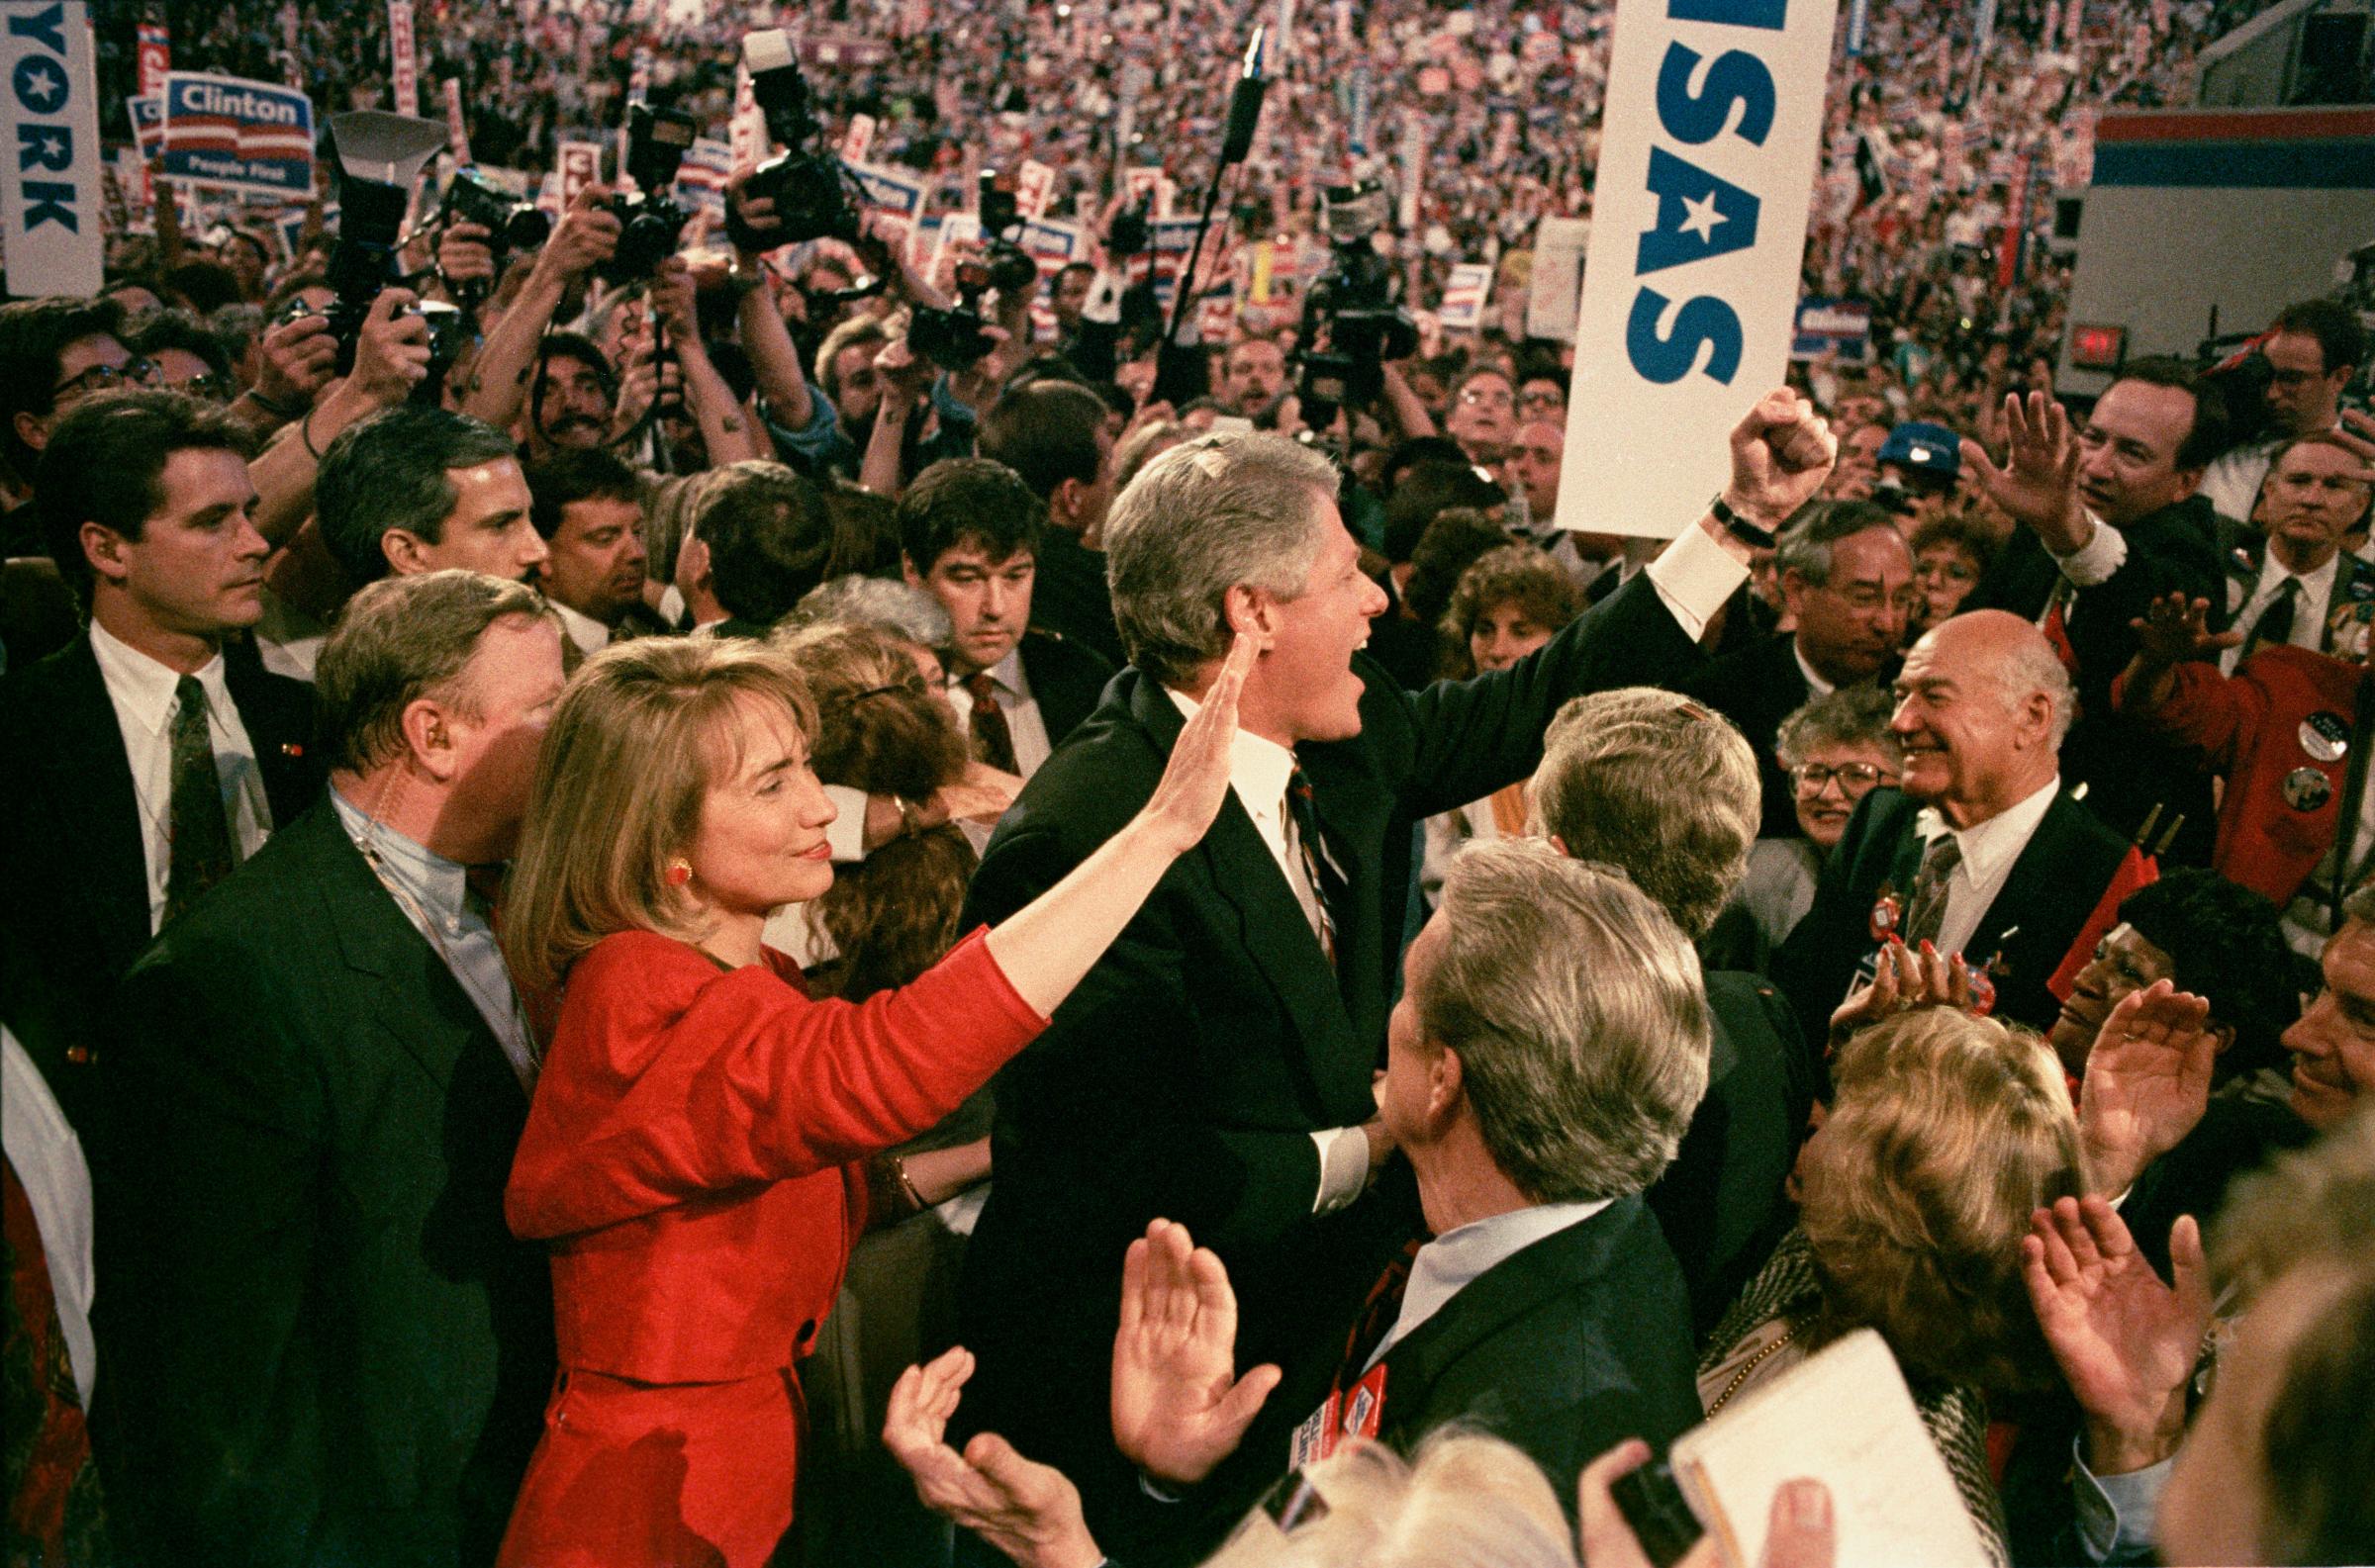 Democratic National Convention at Madison Square Garden, New York City, NY July 15 1992. Gov. Bill Clinton exults with the convention crowd over...